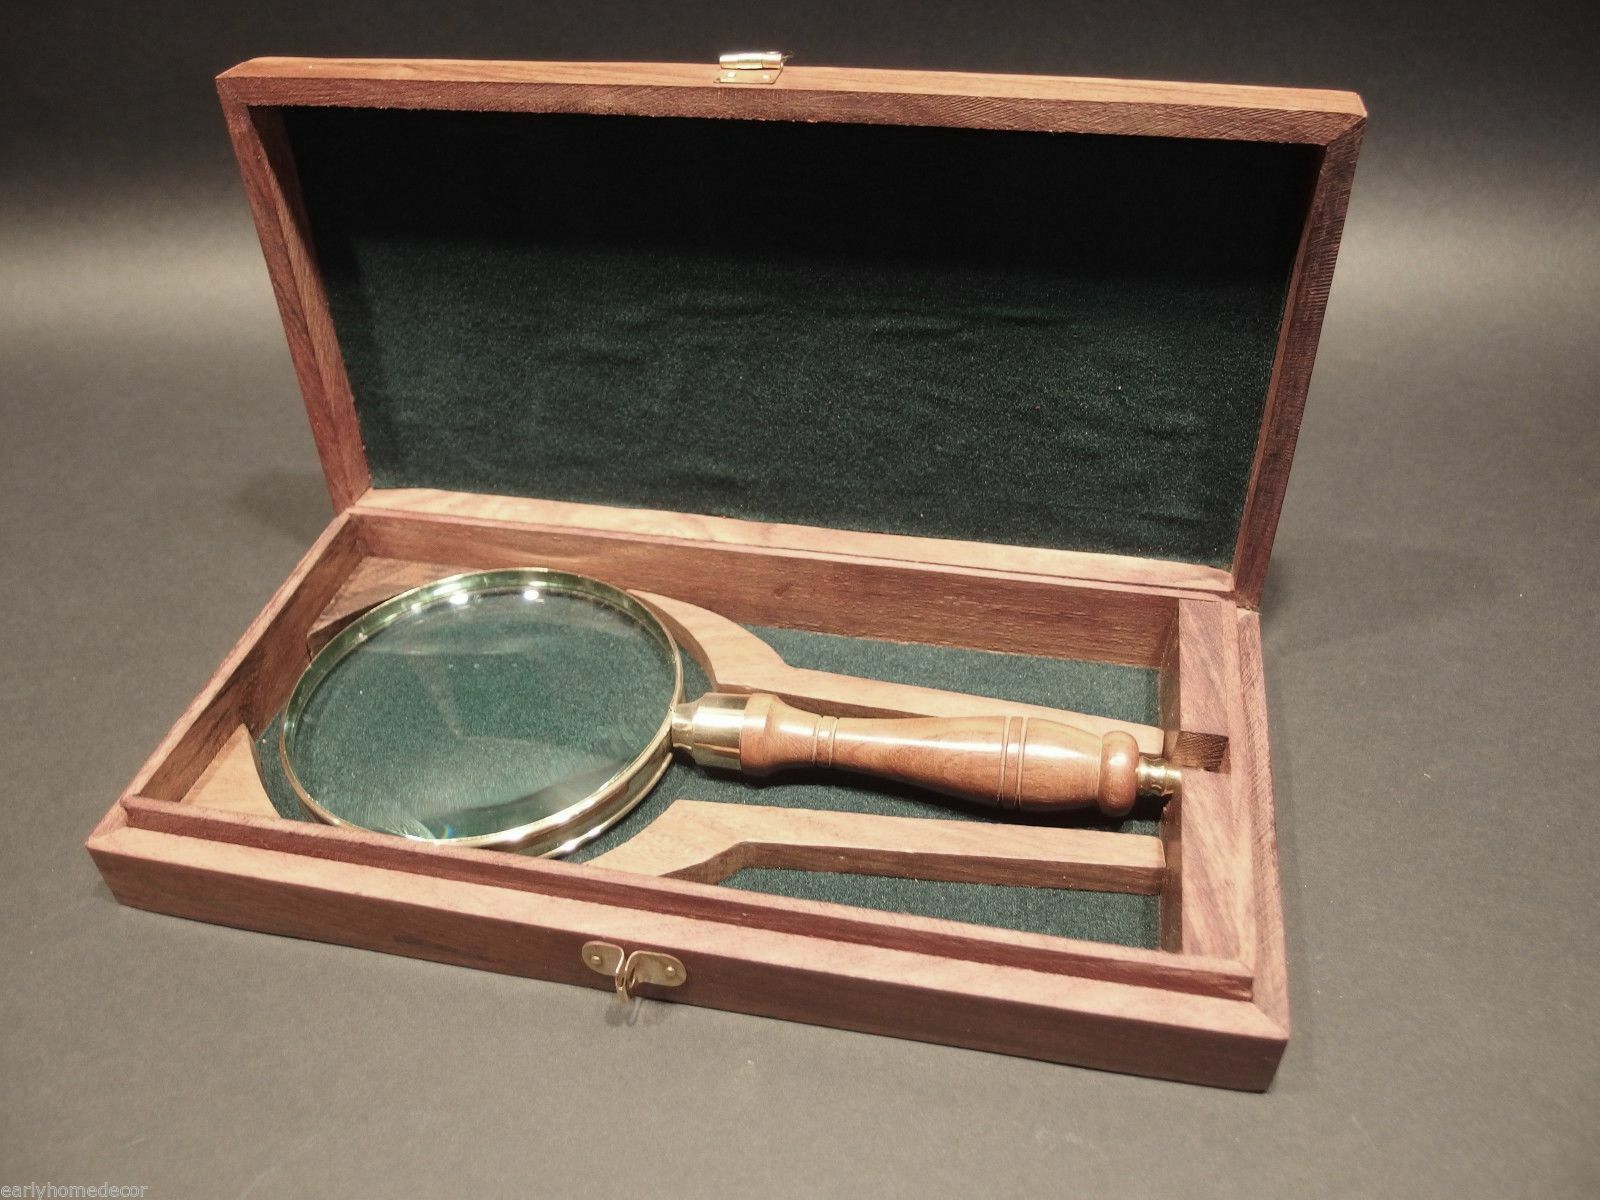 4" 5x Antique Style Magnifying Glass Brass w Wood Turned Hand Lens Desktop Box - Early Home Decor